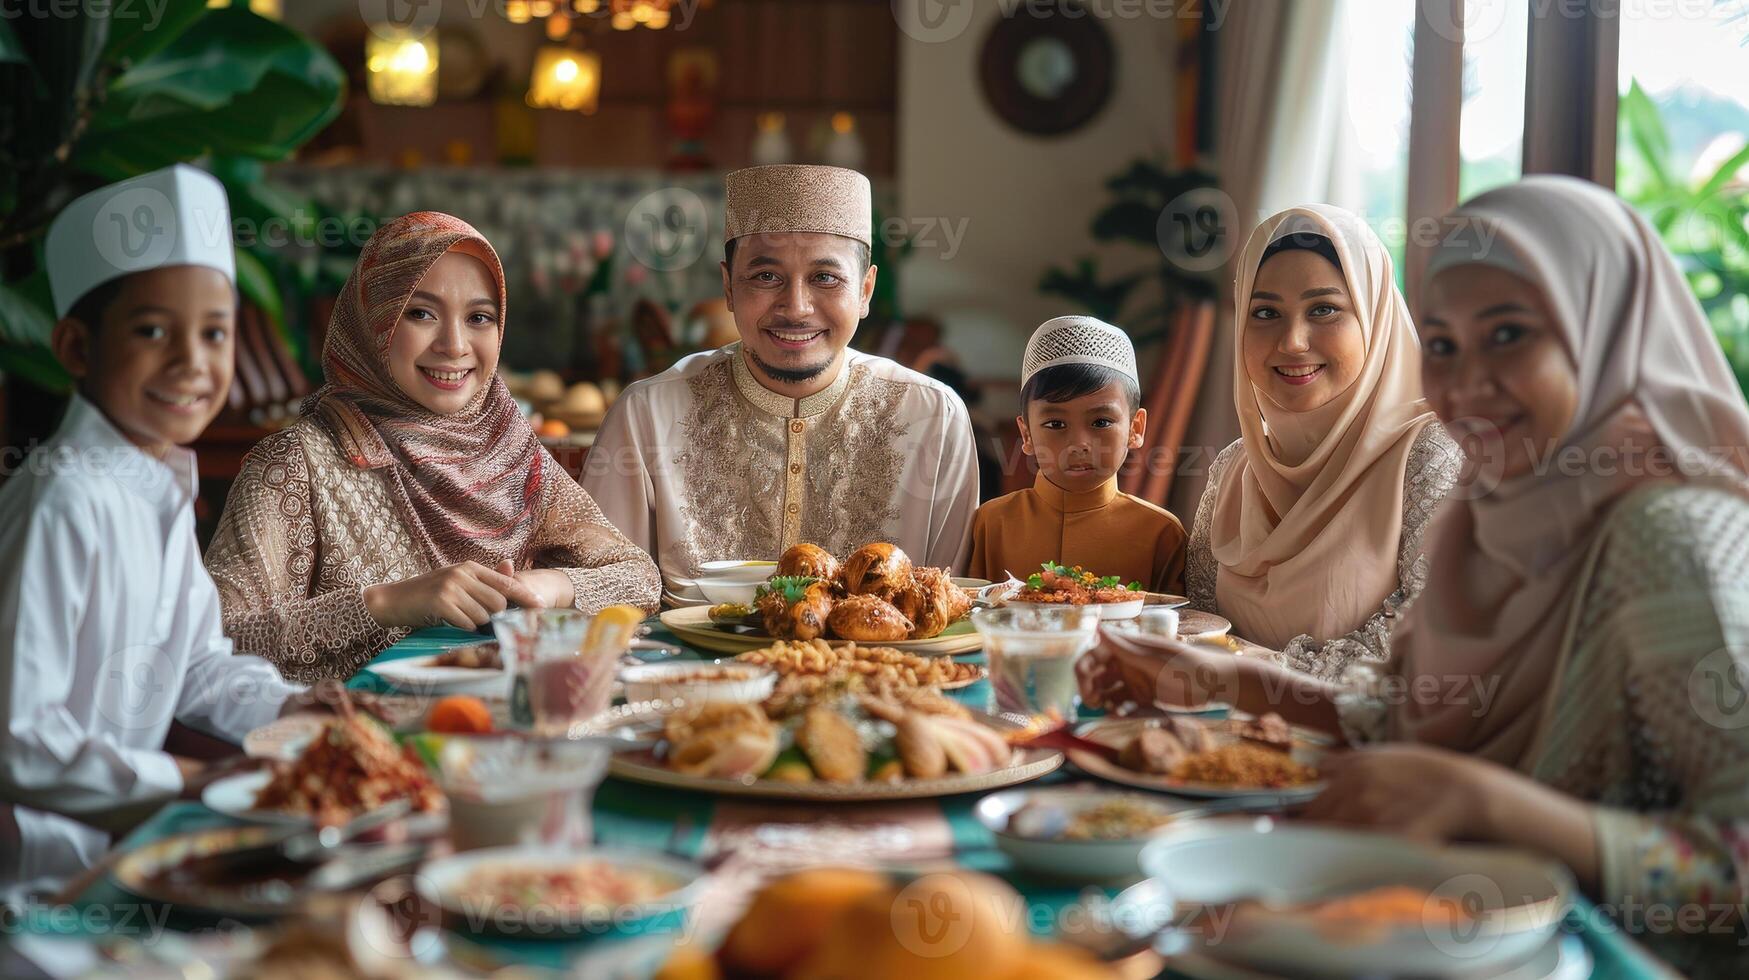 The big muslim family eating during celebrate Eid Al Adha. Traditional food photo